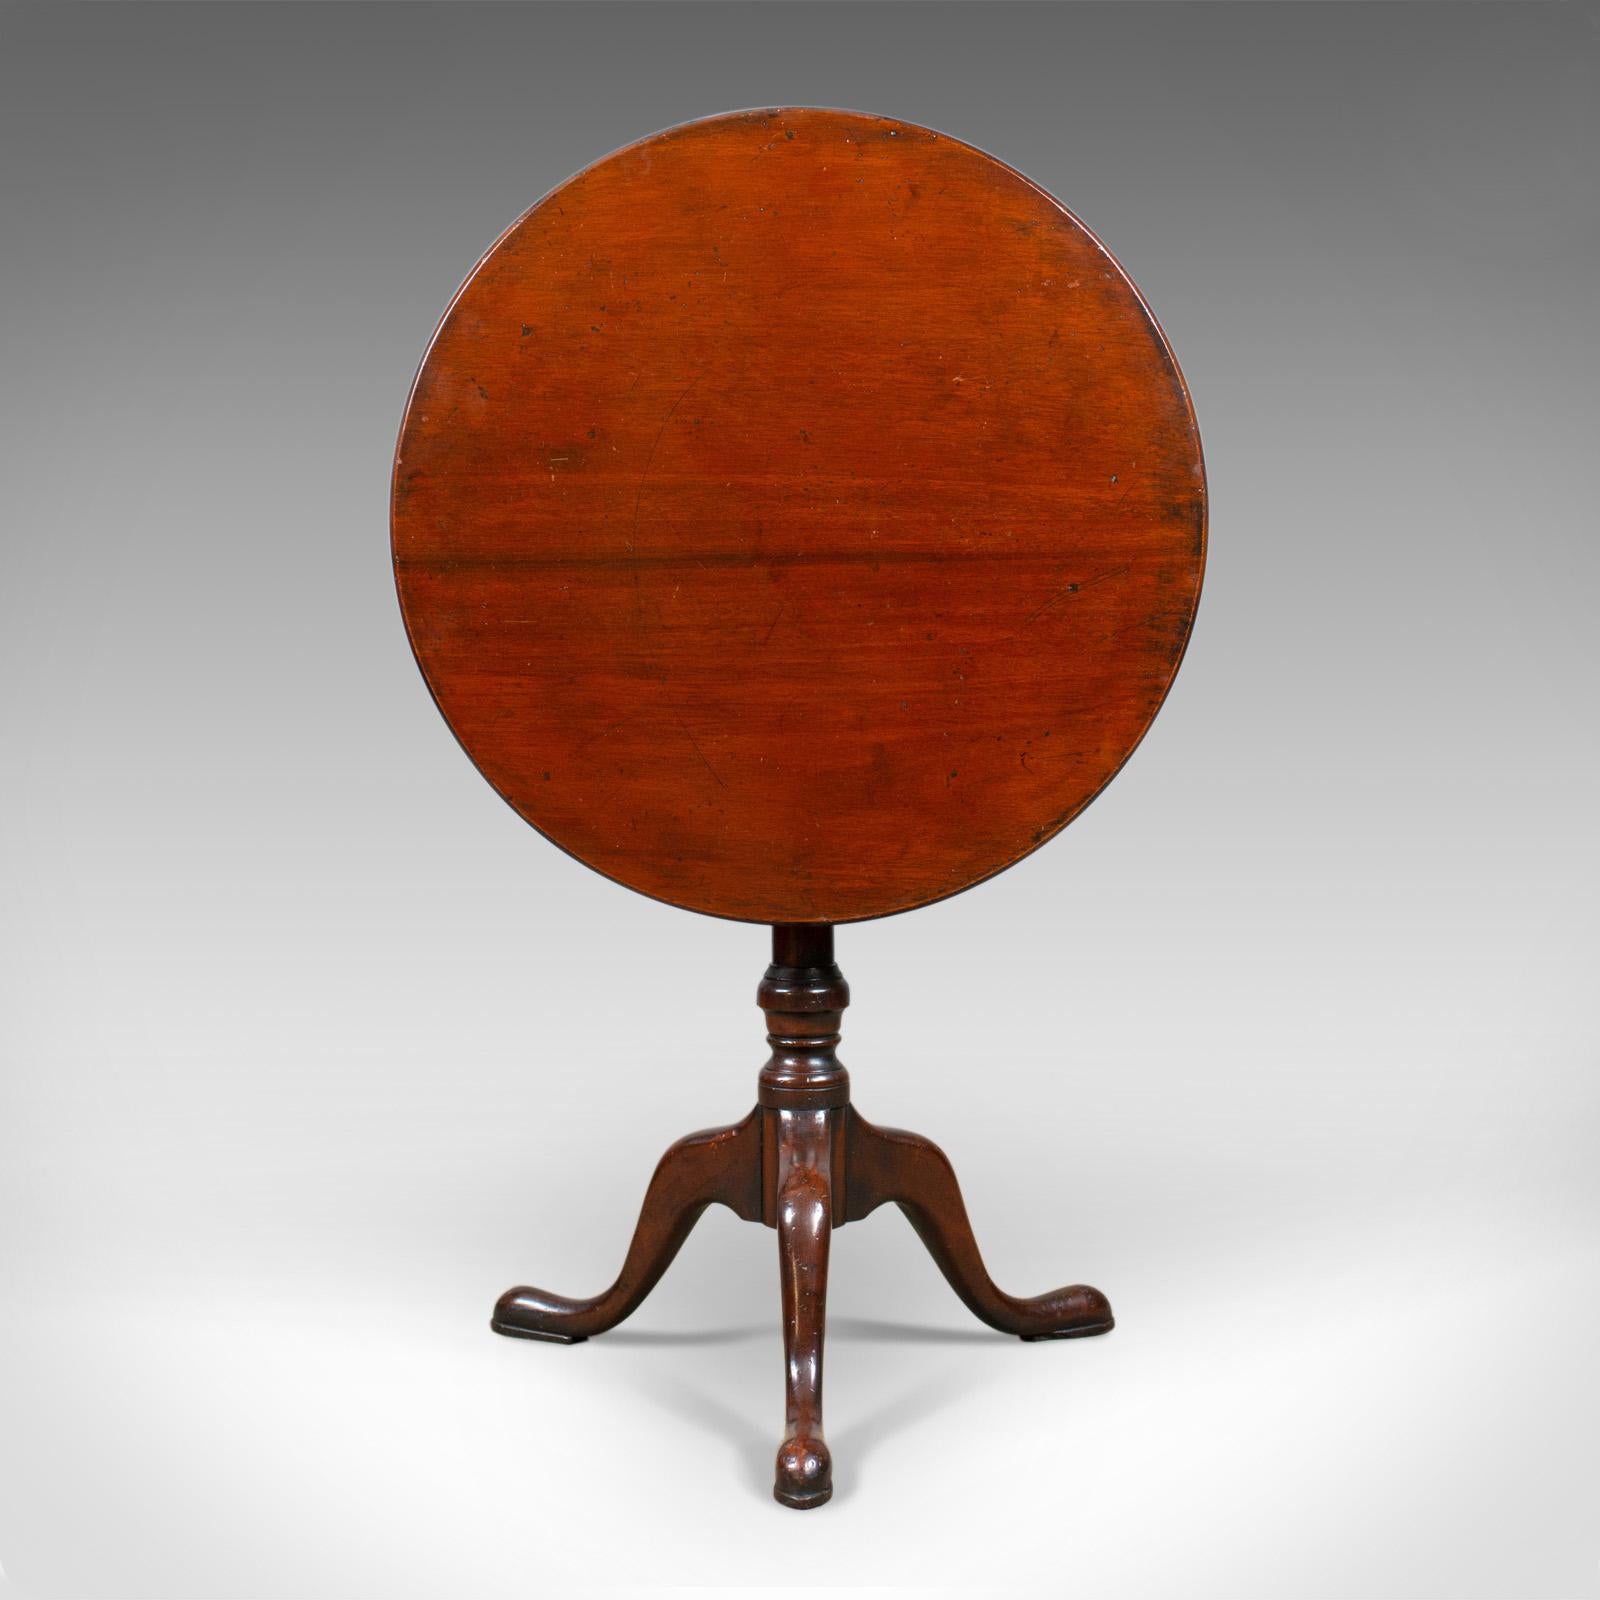 This is an antique tilt-top side table. An English, Georgian, mahogany wine table dating to the early 19th century, circa 1800.

Appealing patina and grain interest in the select mahogany
Good colour depth shining through the wax polished